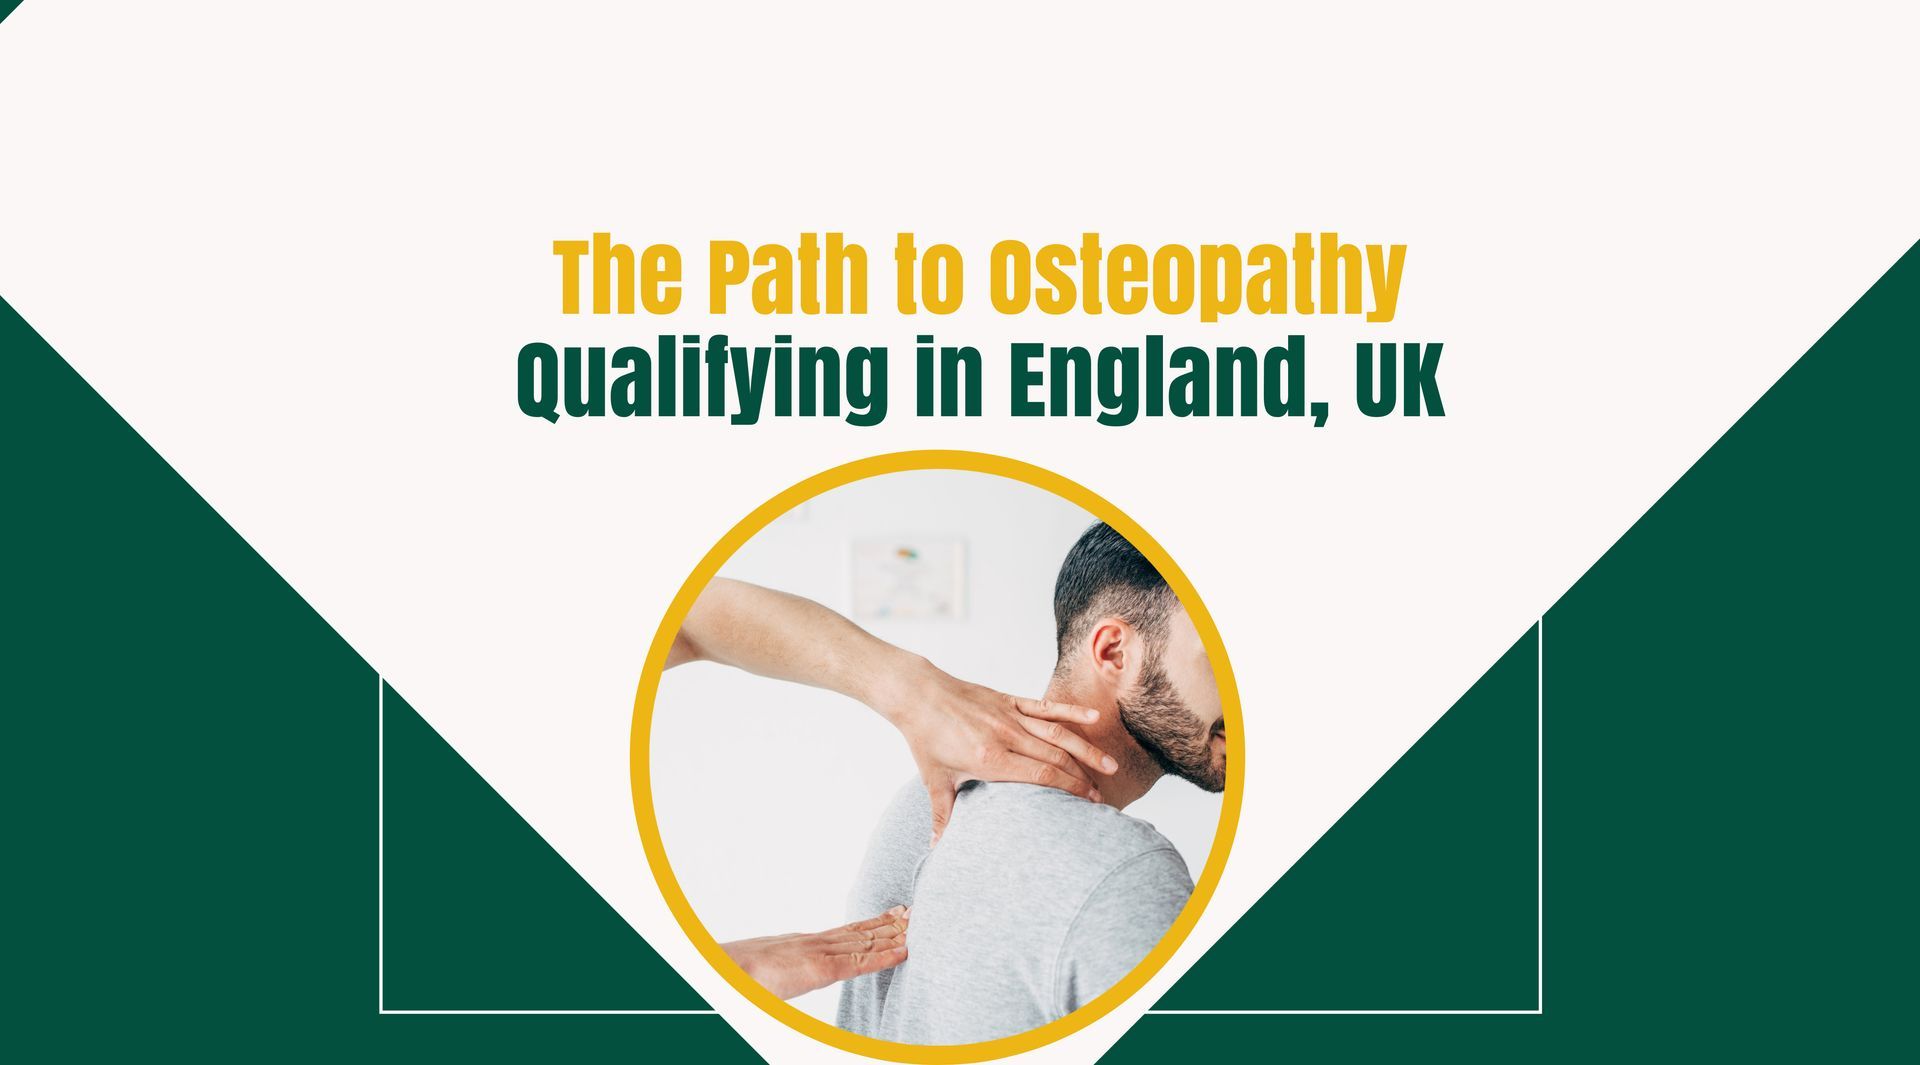 The Path to Osteopathy: Qualifying in England, UK